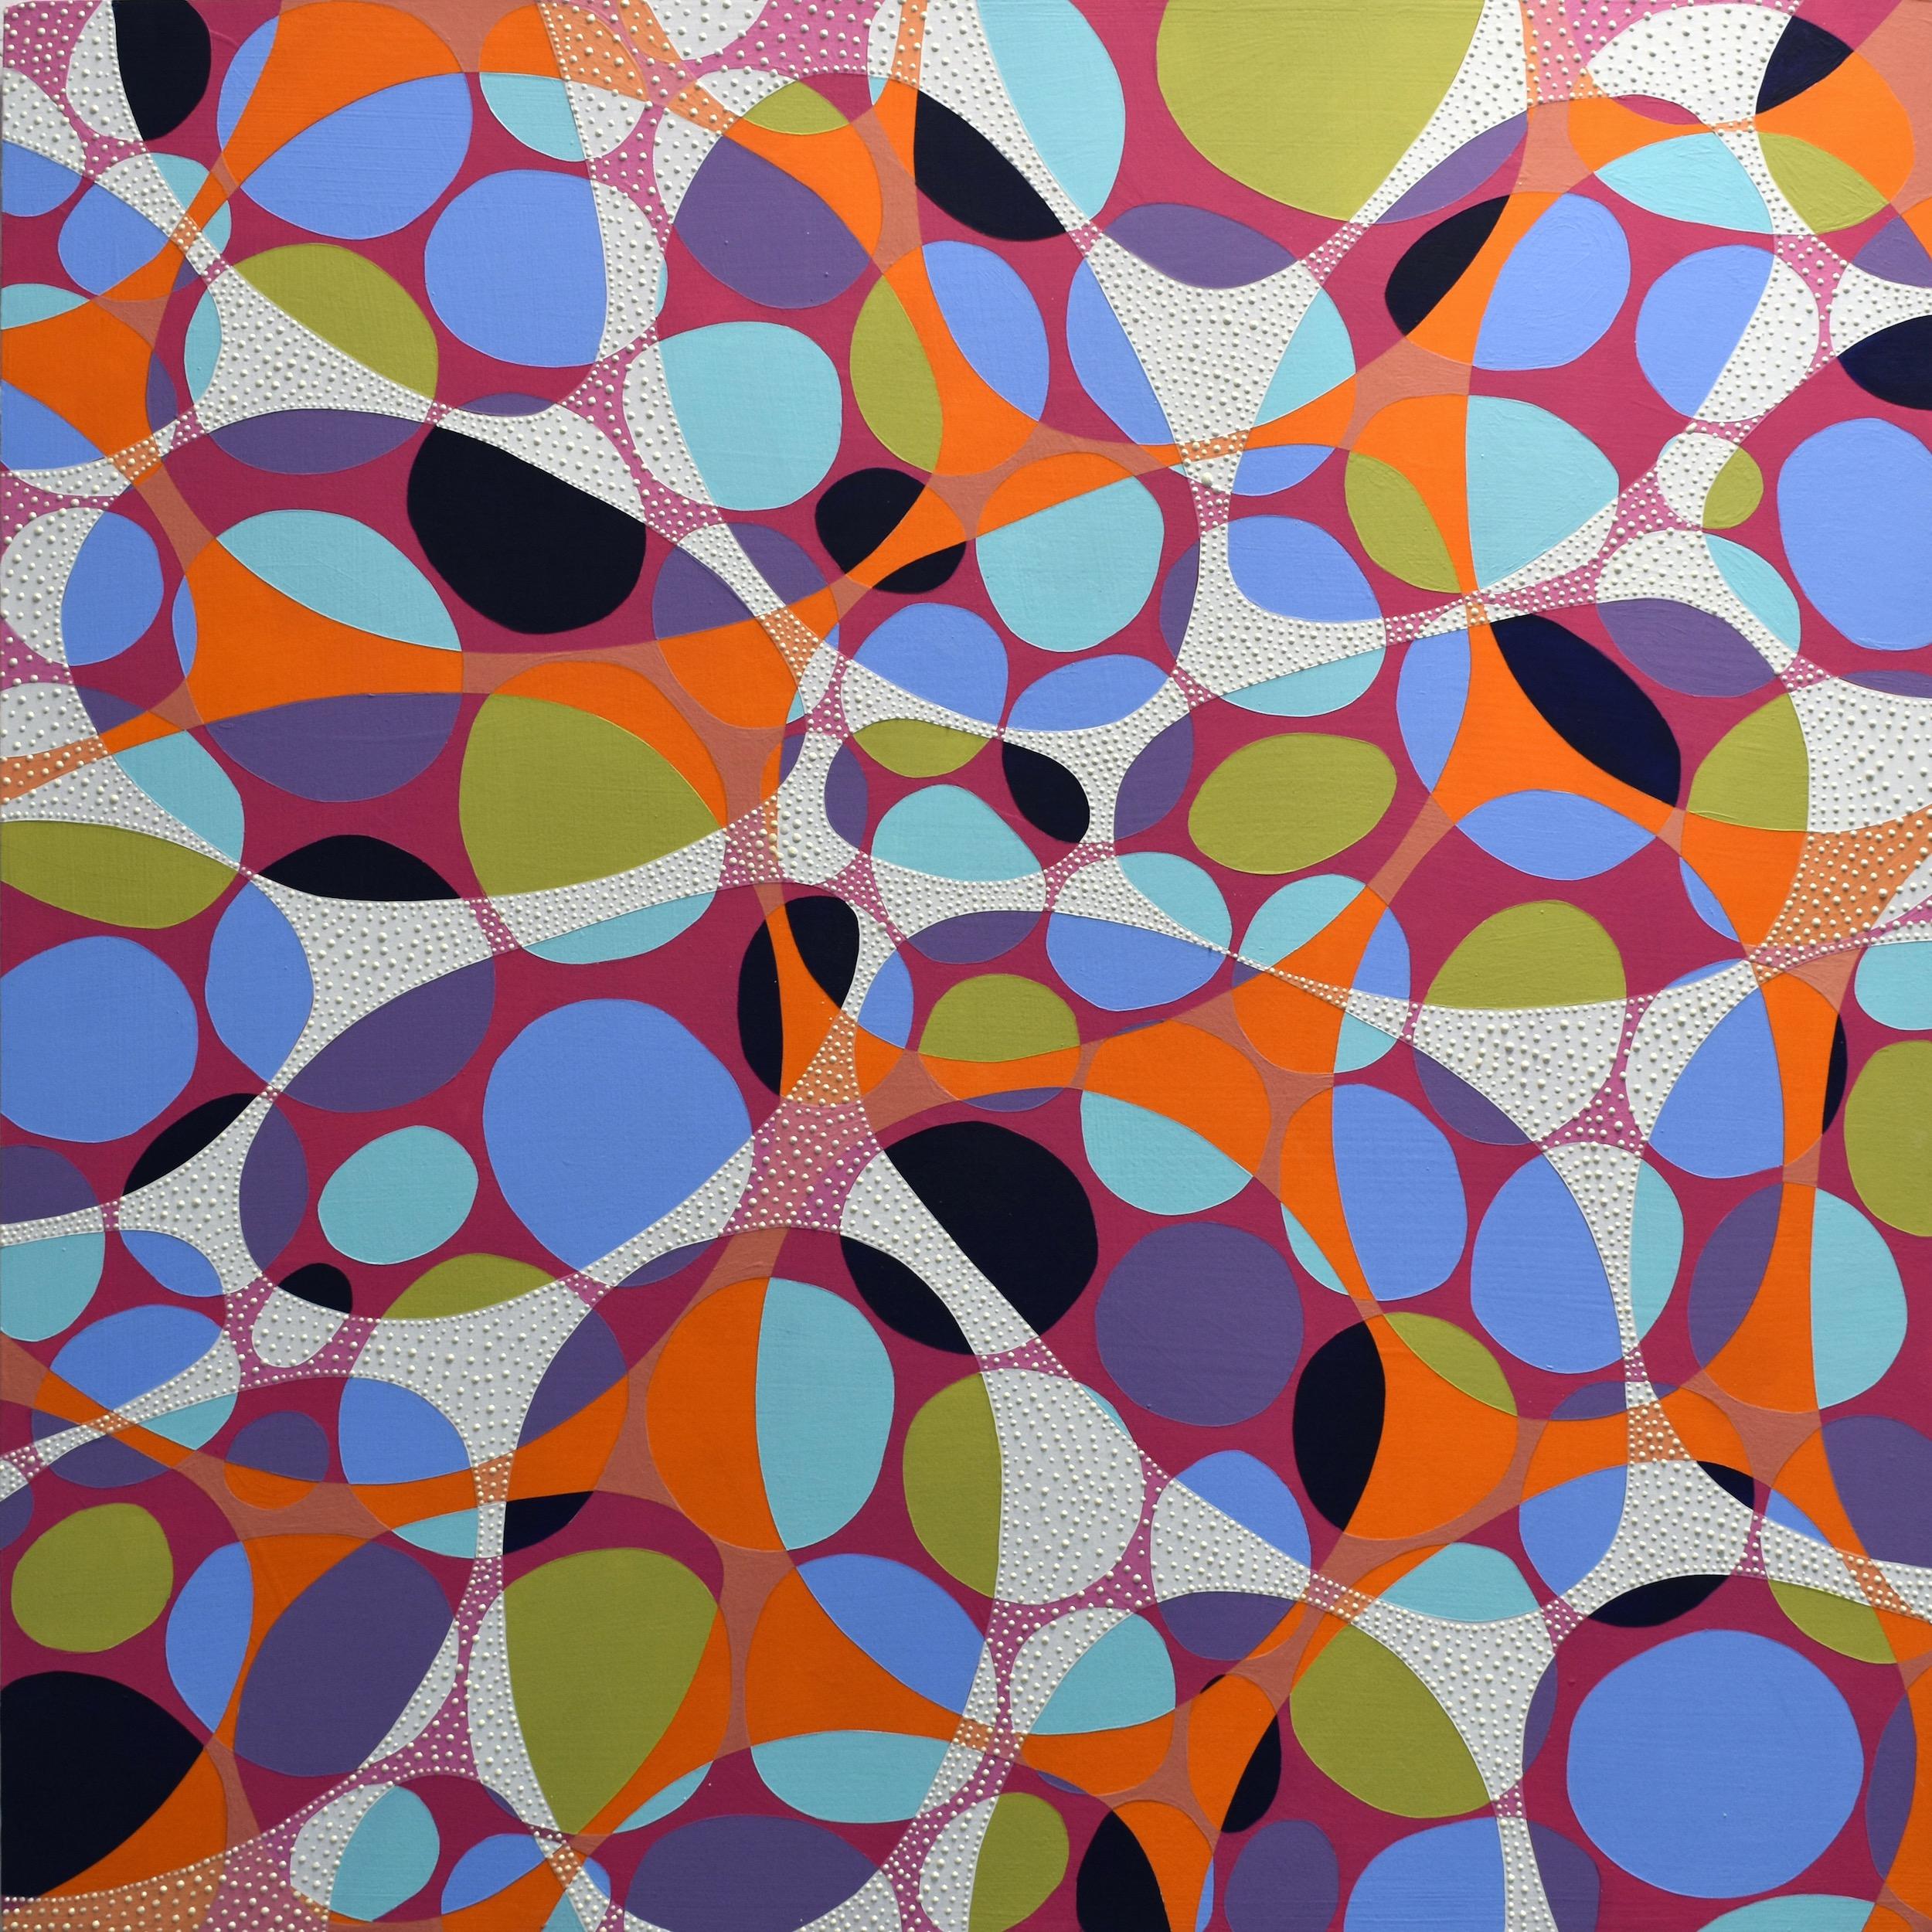 "Kinship 12", abstract, ovals, magenta, orange, blues, greens, acrylic painting - Painting by Denise Driscoll